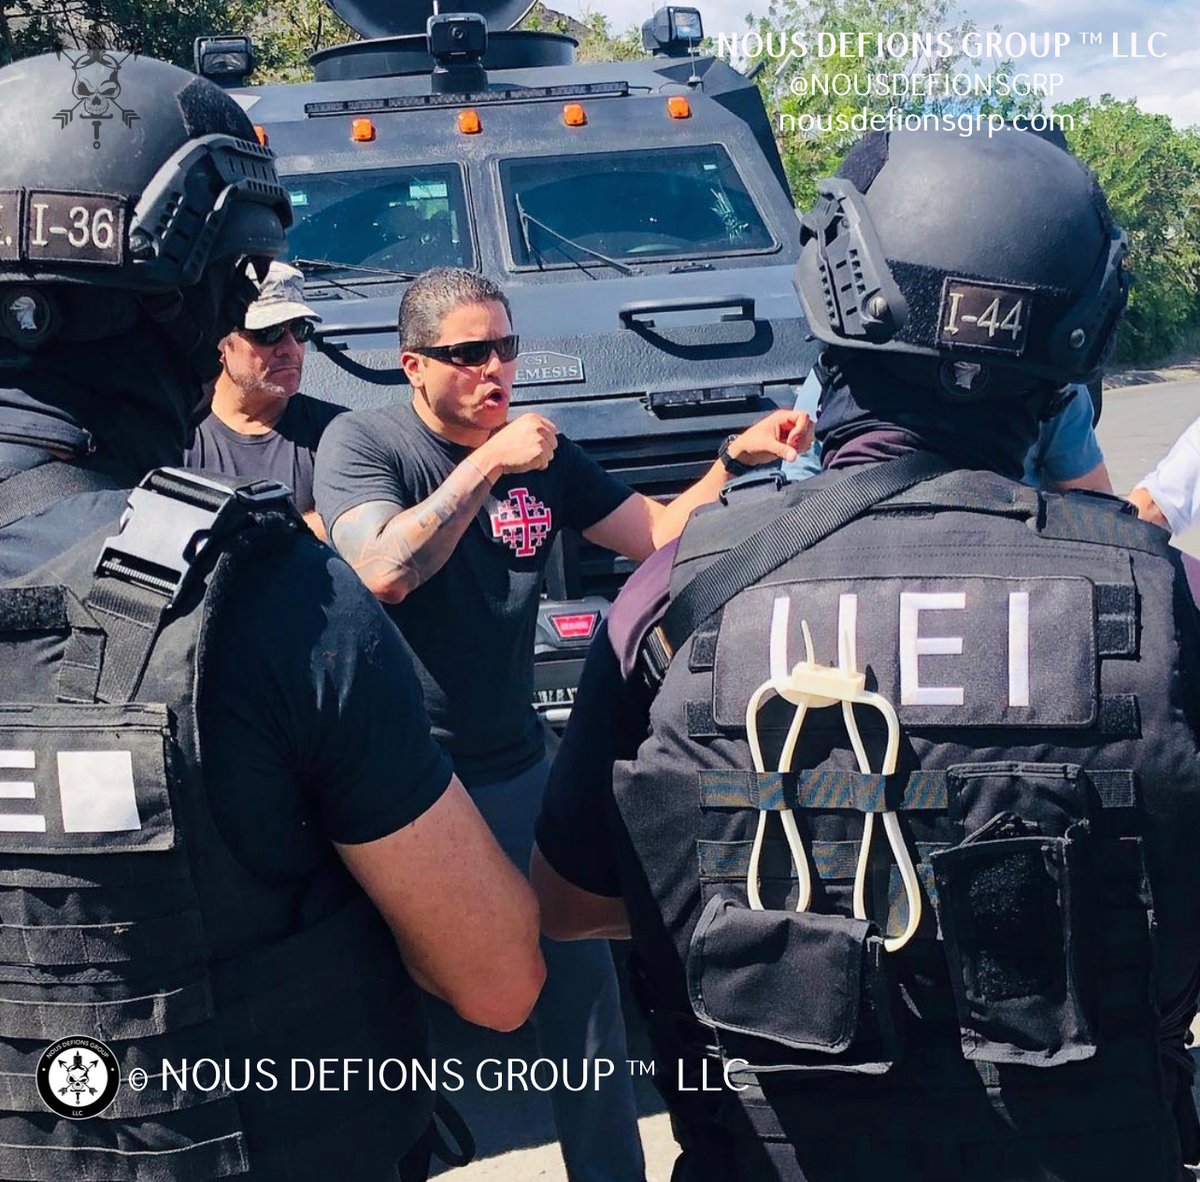 Stay receptive to incorporating both timeless and innovative knowledge during every training session, in order to consistently enhance your skill set. 

#NDGLLC #FearTheSkull #SpecialForces #DeOppressoLiber #NousDefions #GreenBerets #NousDefionsGrp #training #costarica